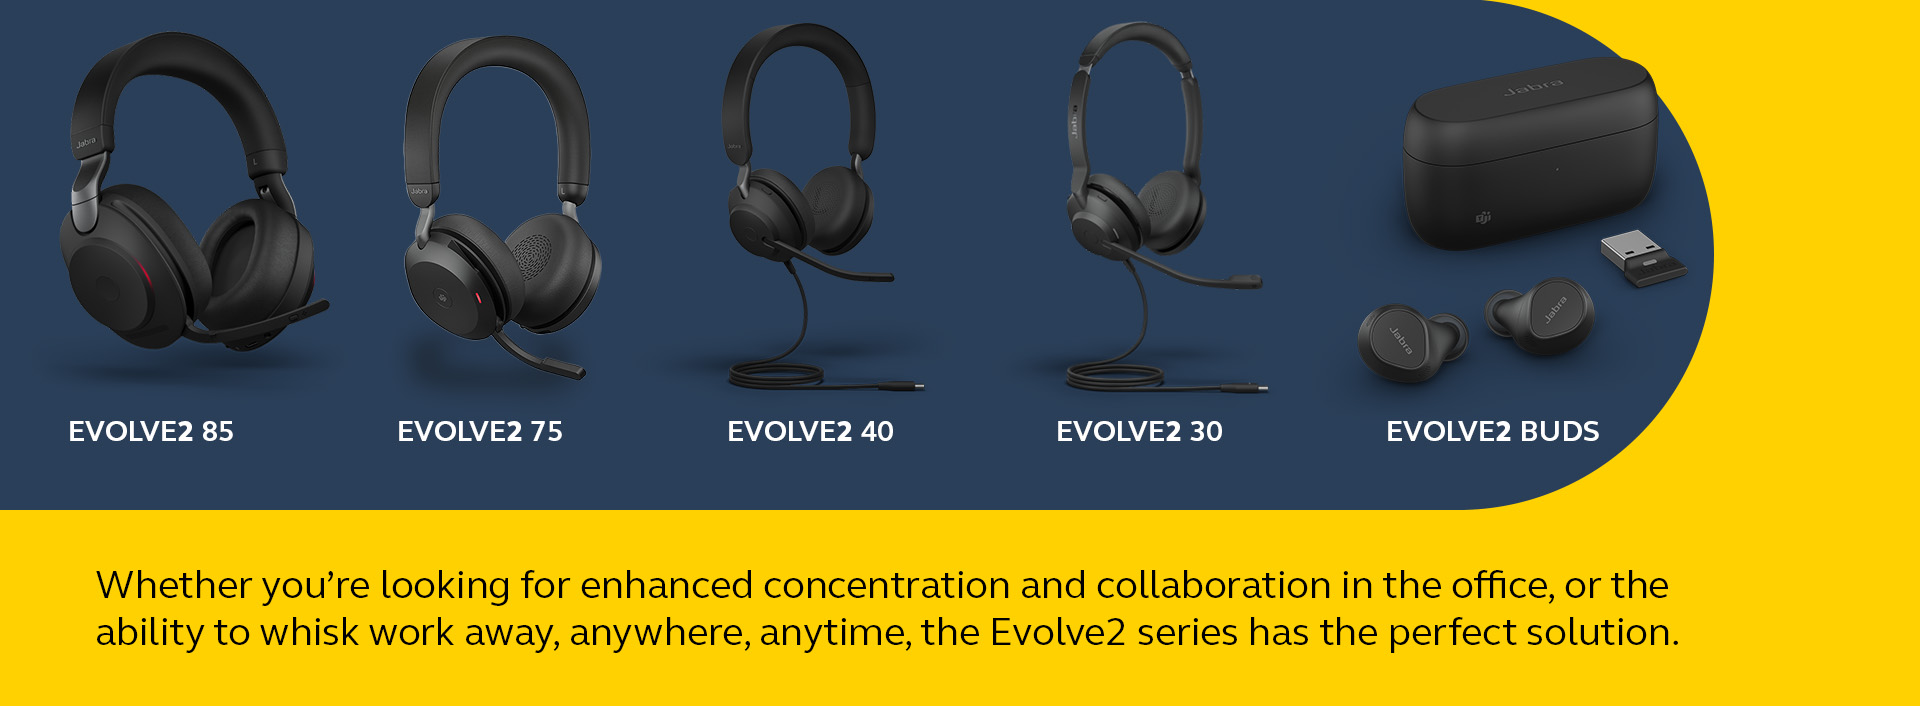 Whether you’re looking for enhanced concentration and collaboration in the office, or the ability to whisk work away, anywhere, anytime, the Evolve2 series has the perfect solution.